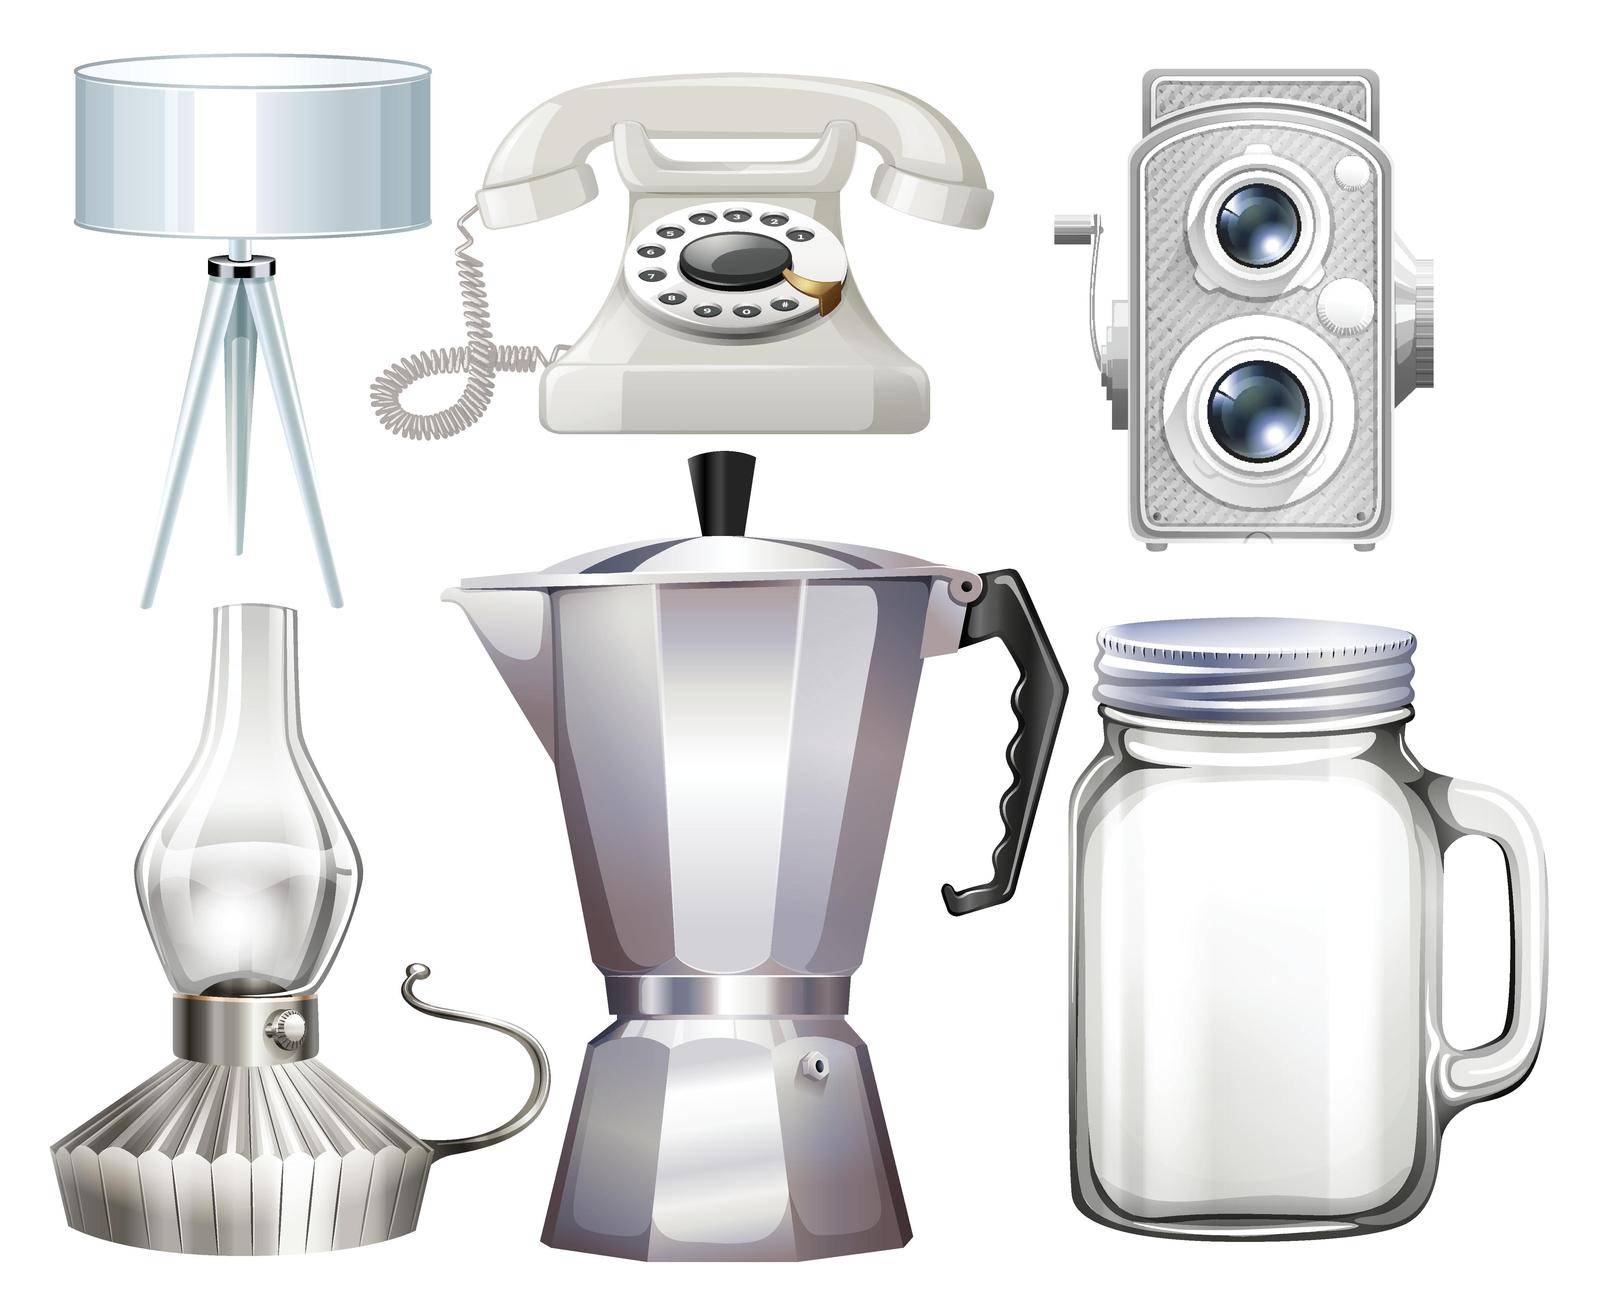 Different kind of household objects